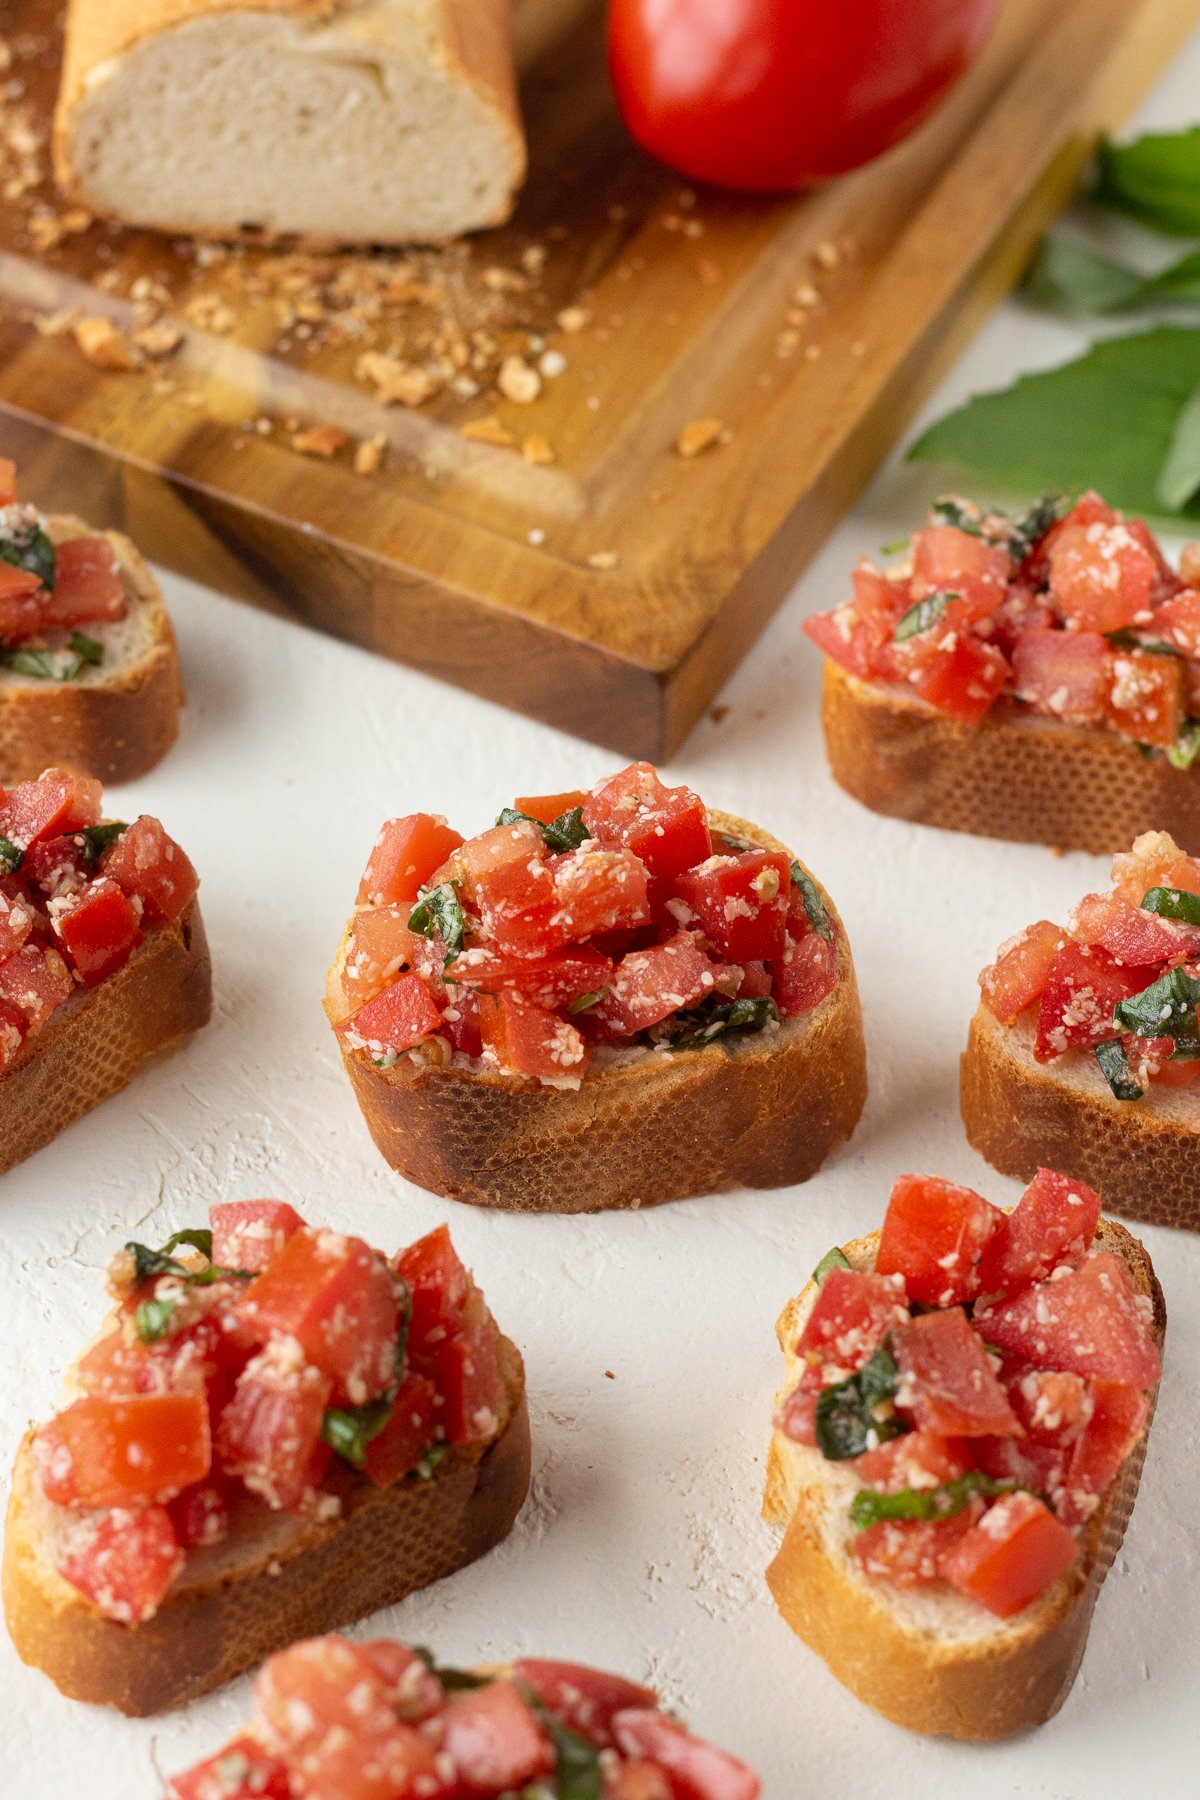 Tomato mixture on top of pieces of French bread slices, sitting next to a cutting board.